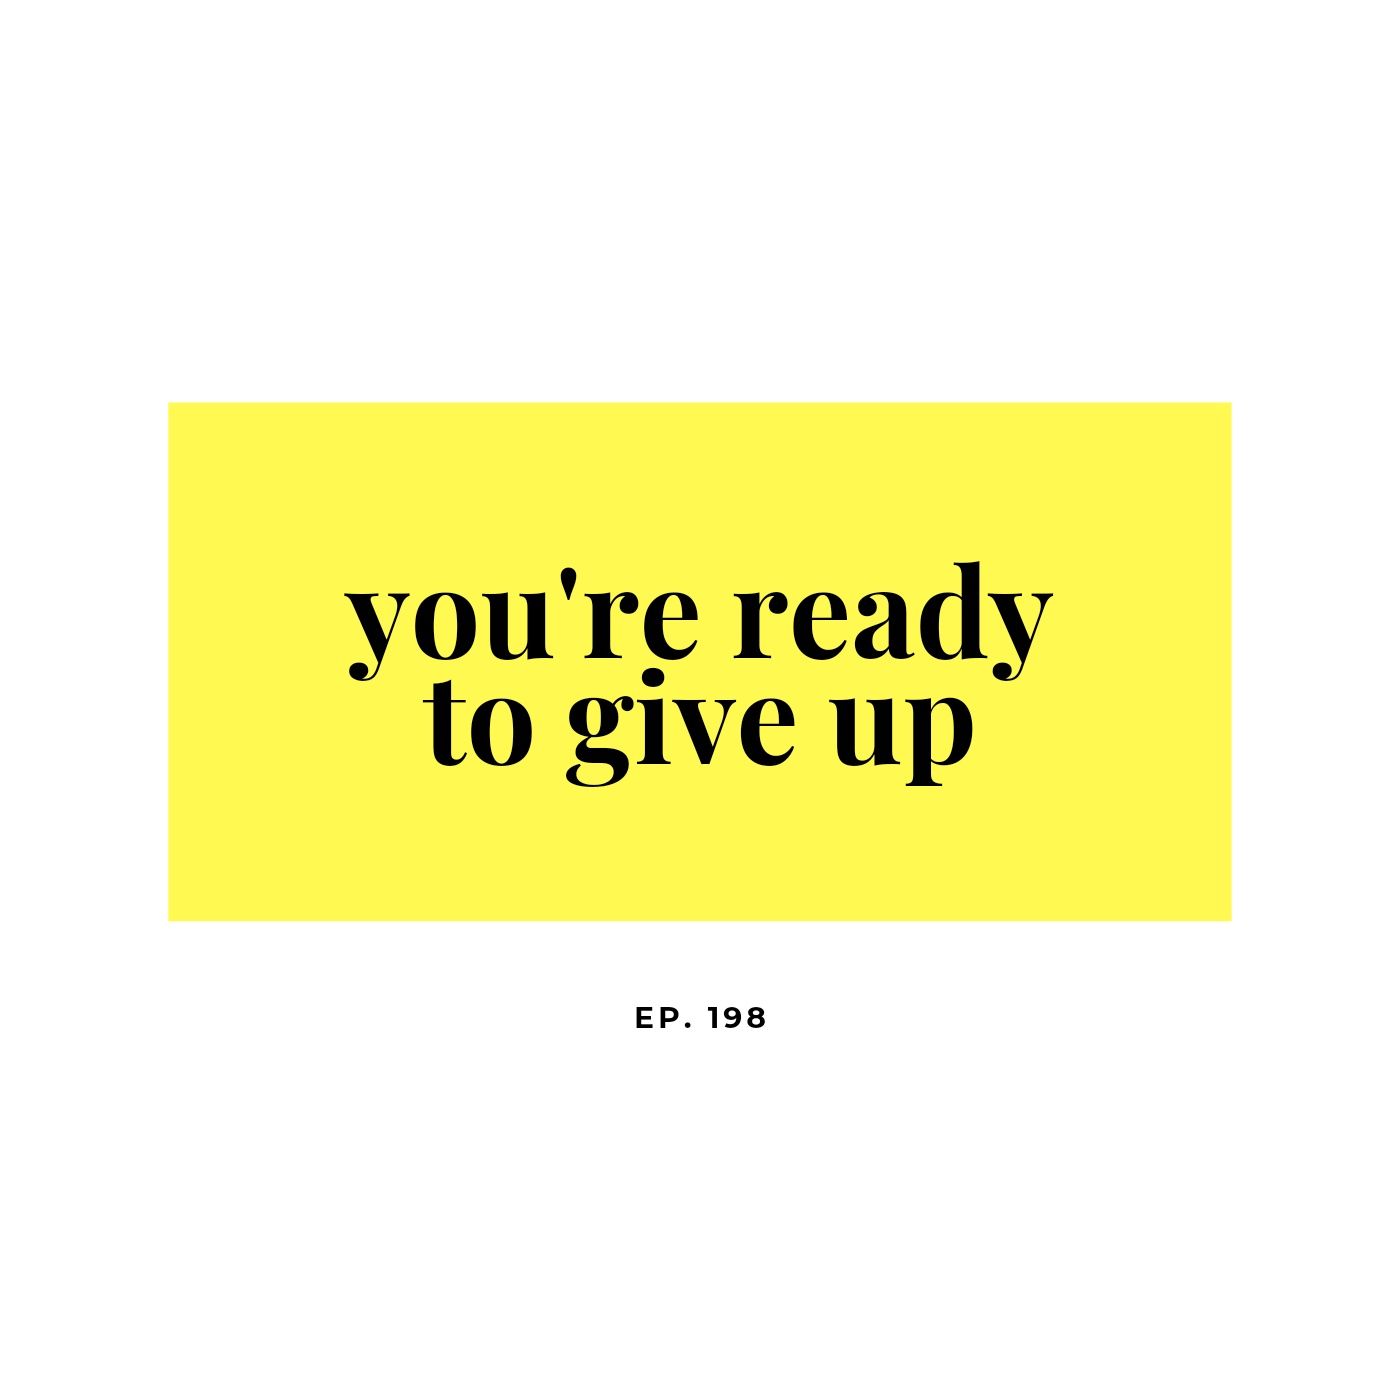 Ep. 198 You're ready to give up